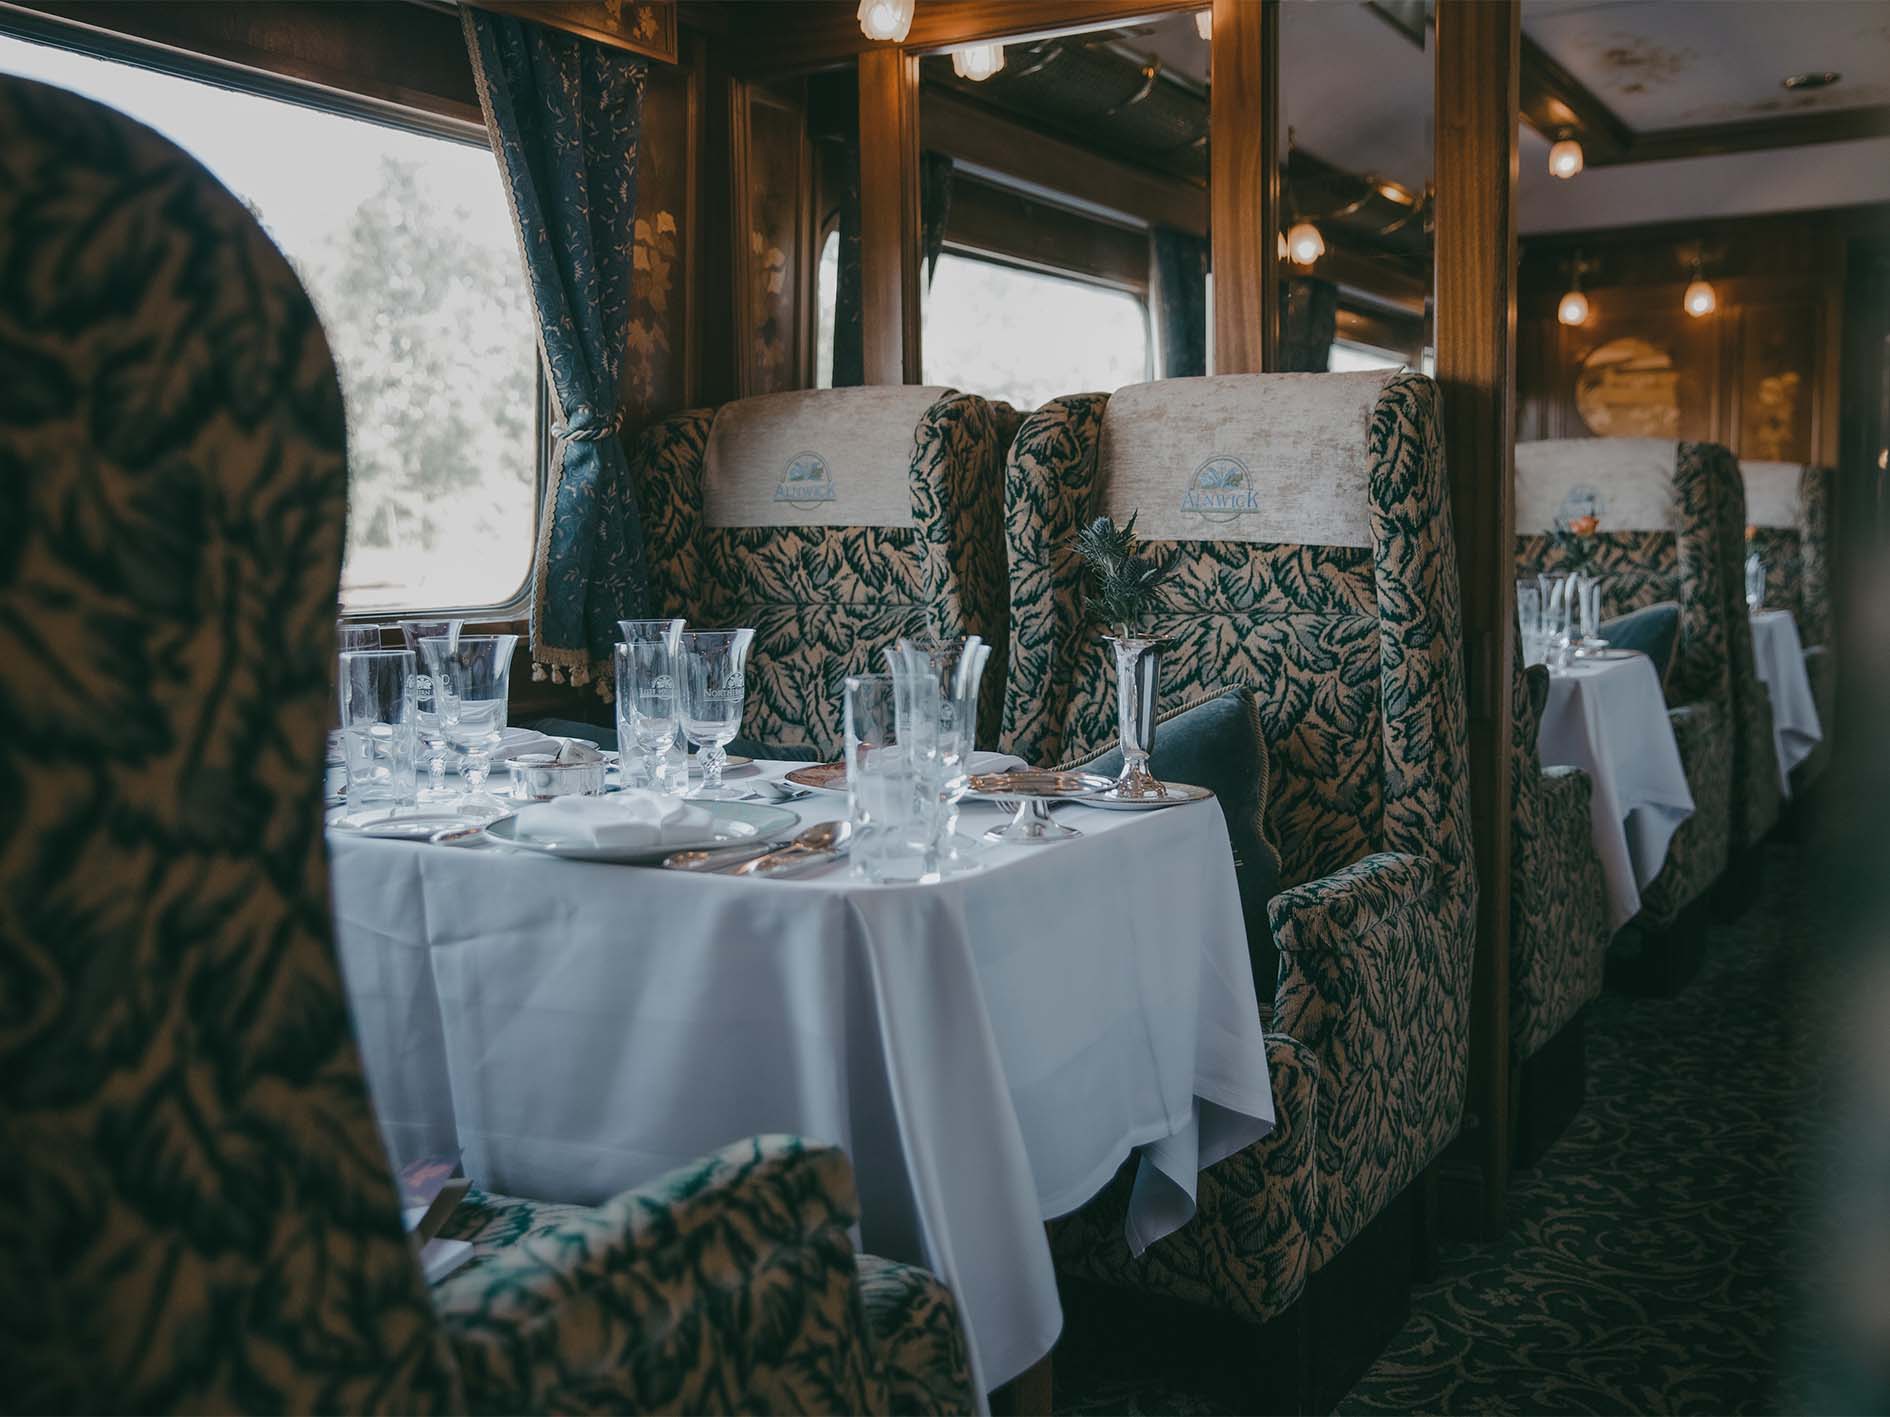 The empty carriage of the Northern Belle